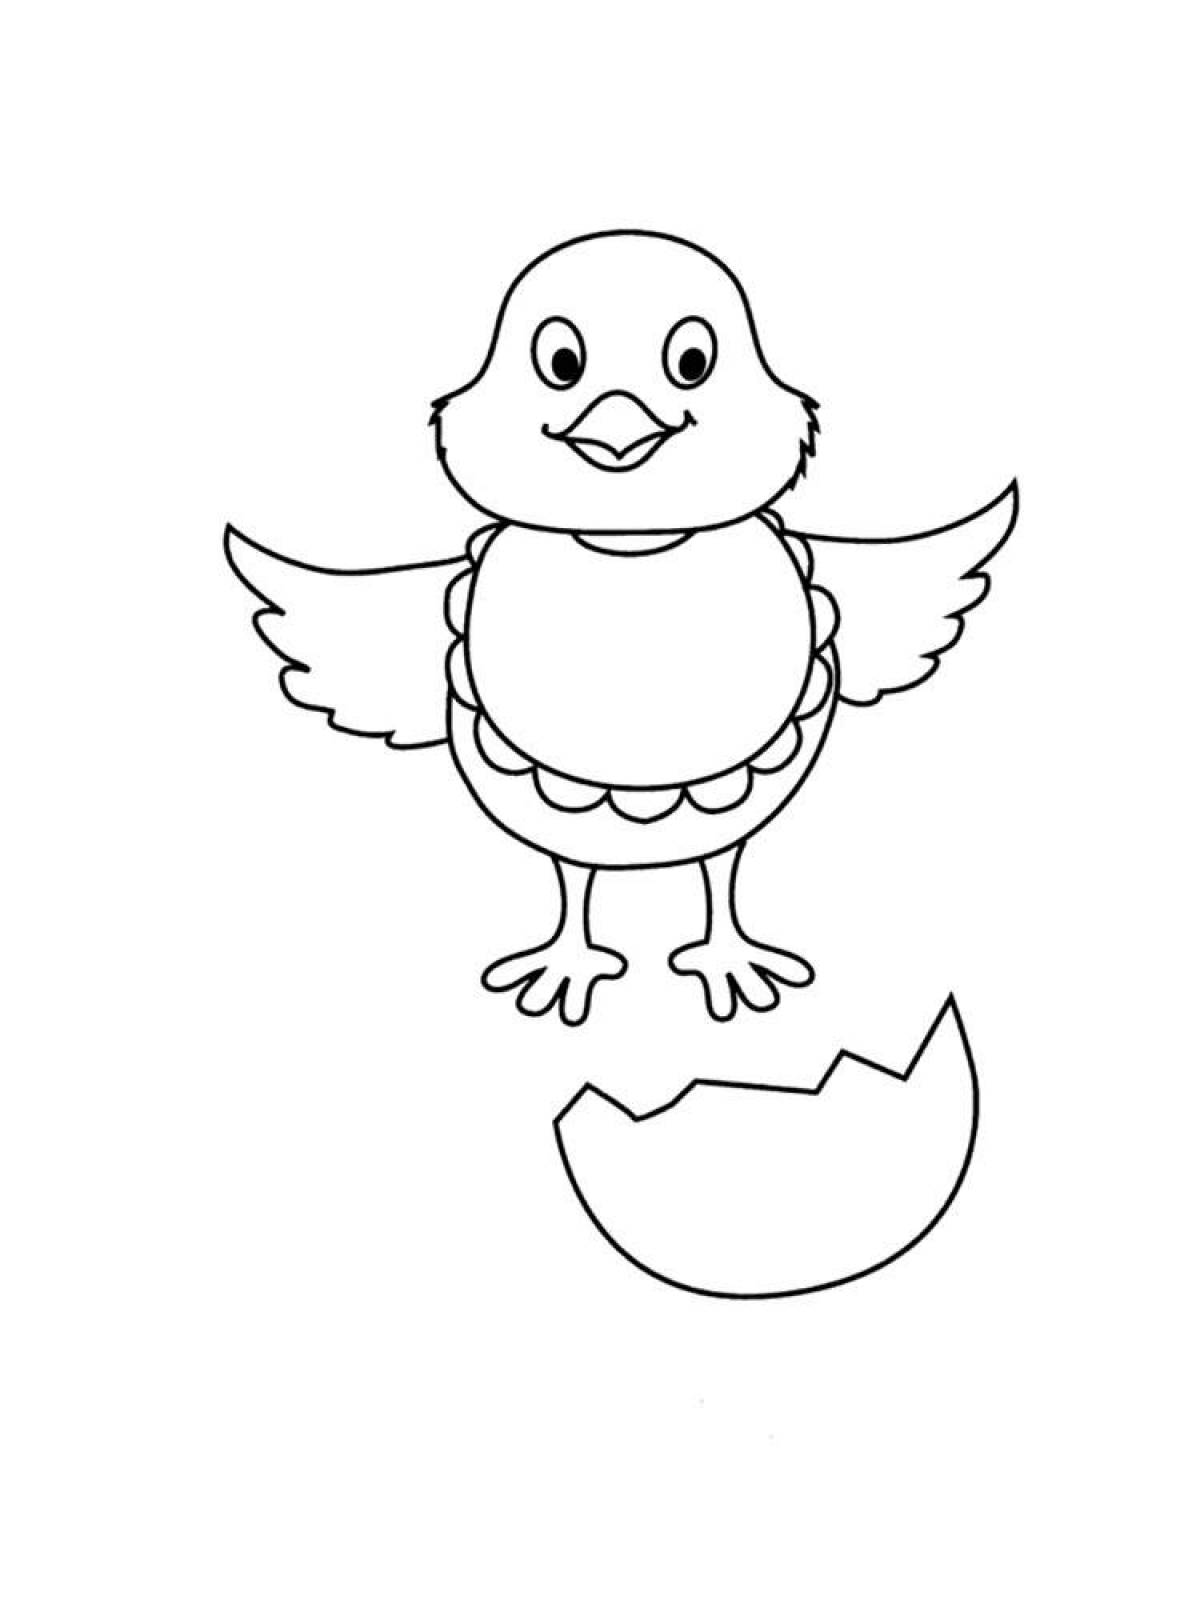 Chicken playful coloring page for 2-3 year olds